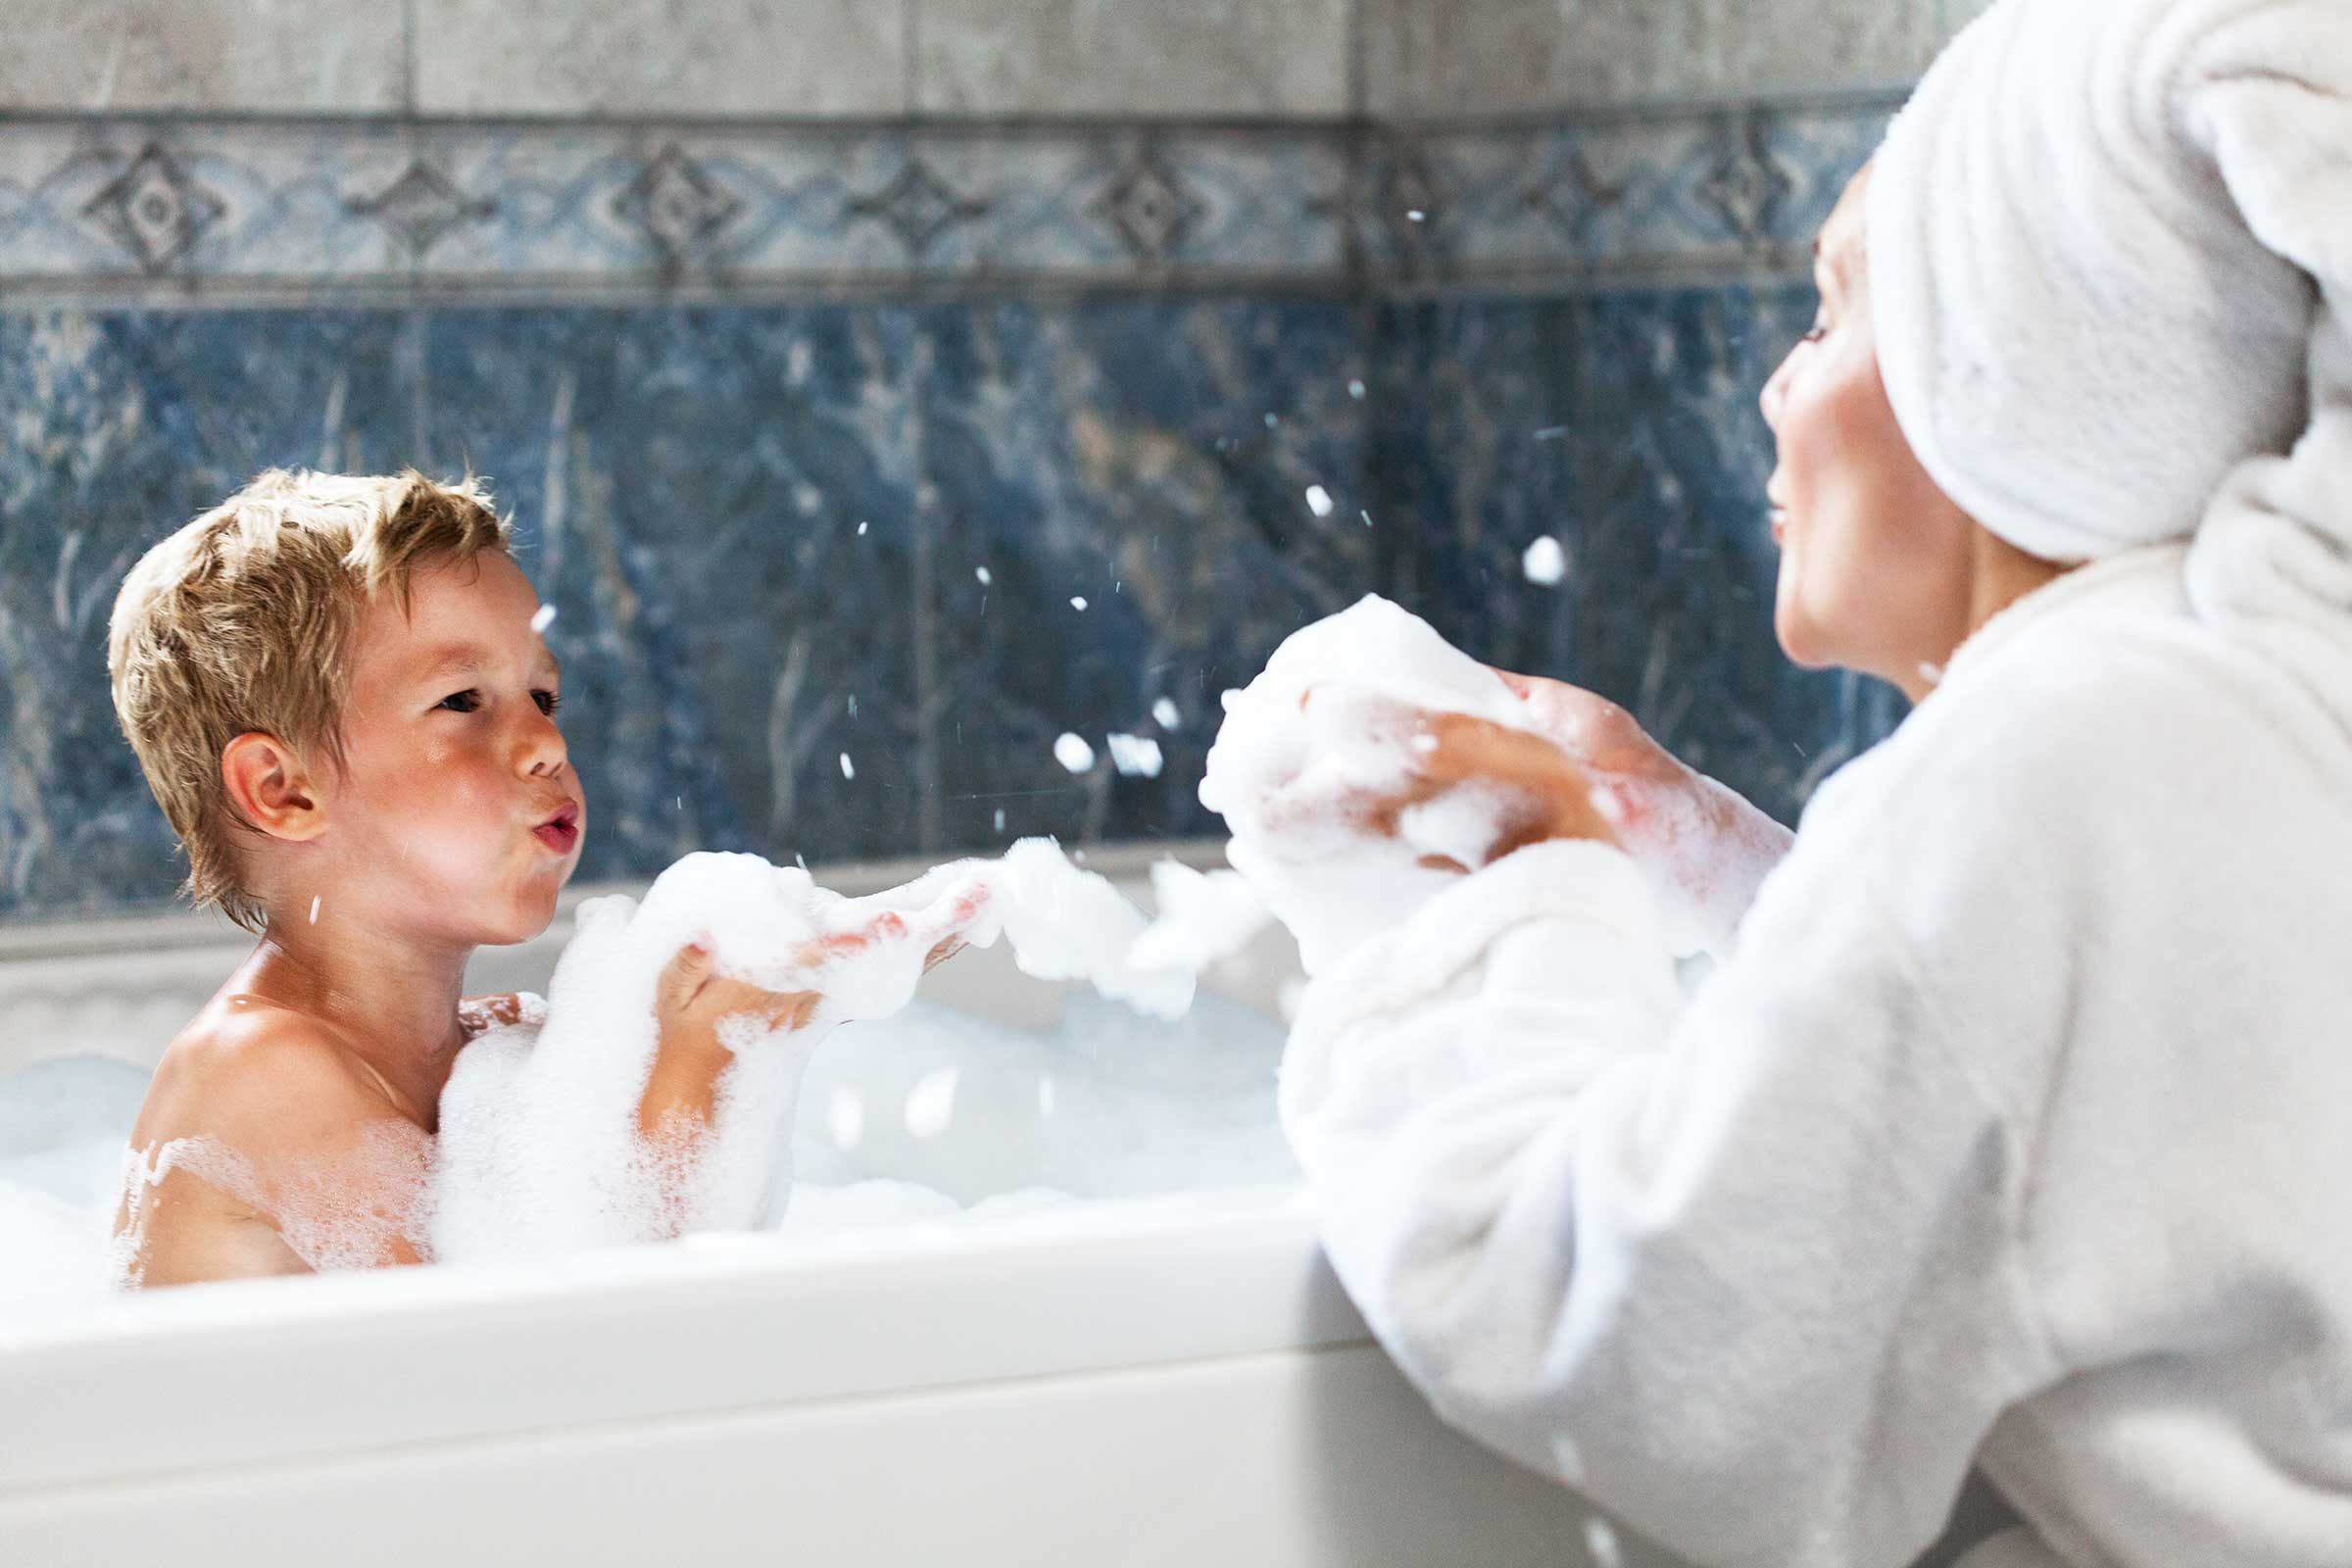 So, You’re Probably Bathing Your Kids WAY Too Much